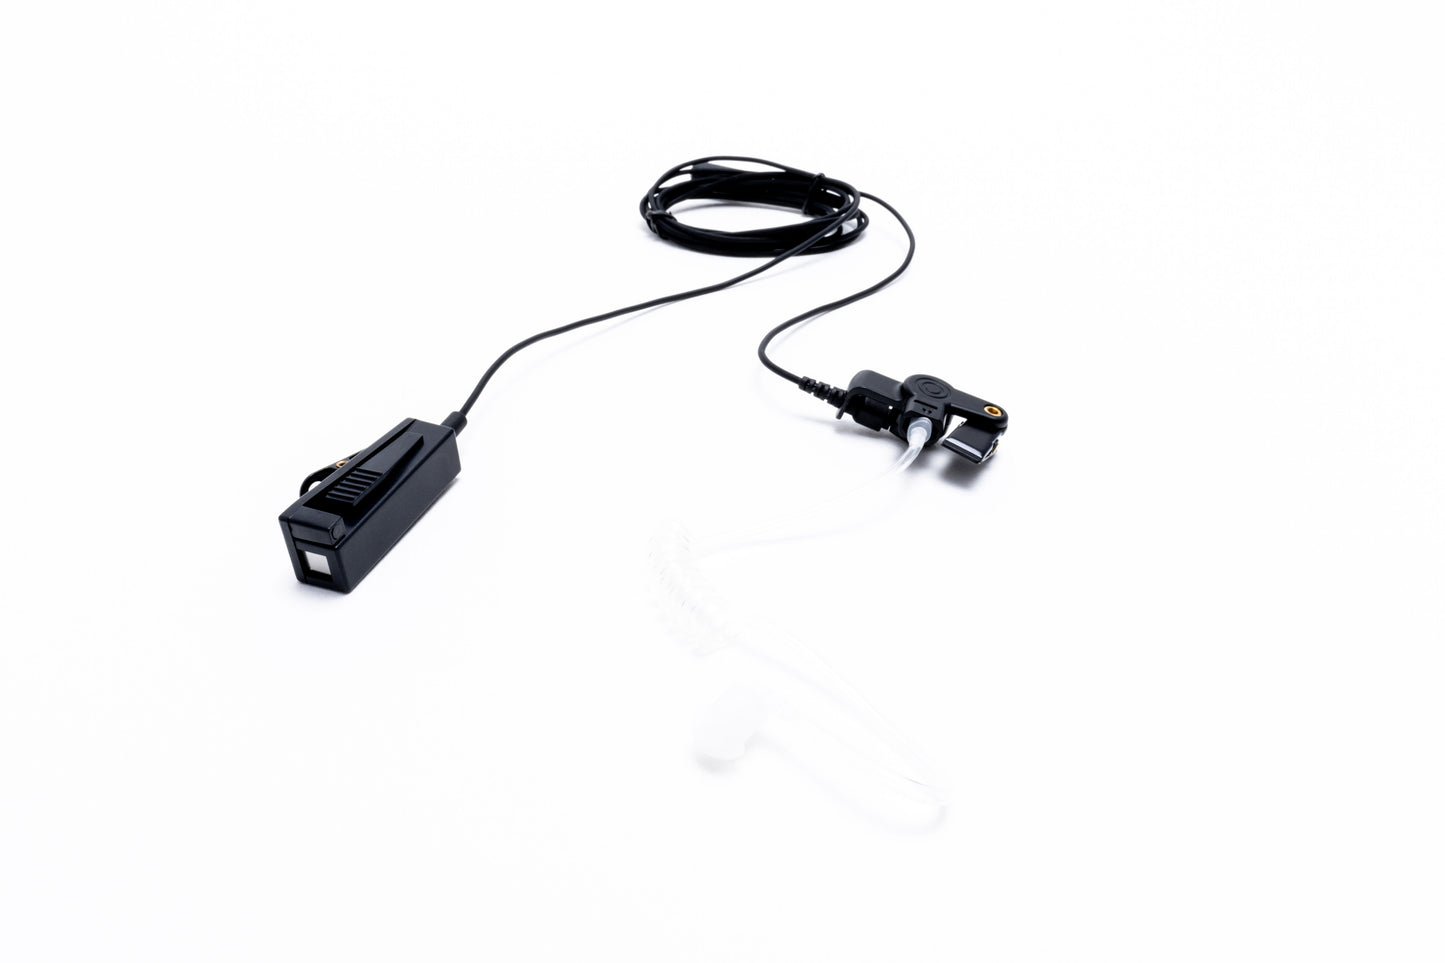 Chrome Series 2-Wire Surveillance Kit for Two-Way Radio with Alternate Style Push-to-Talk (PTT) / Mic Switch